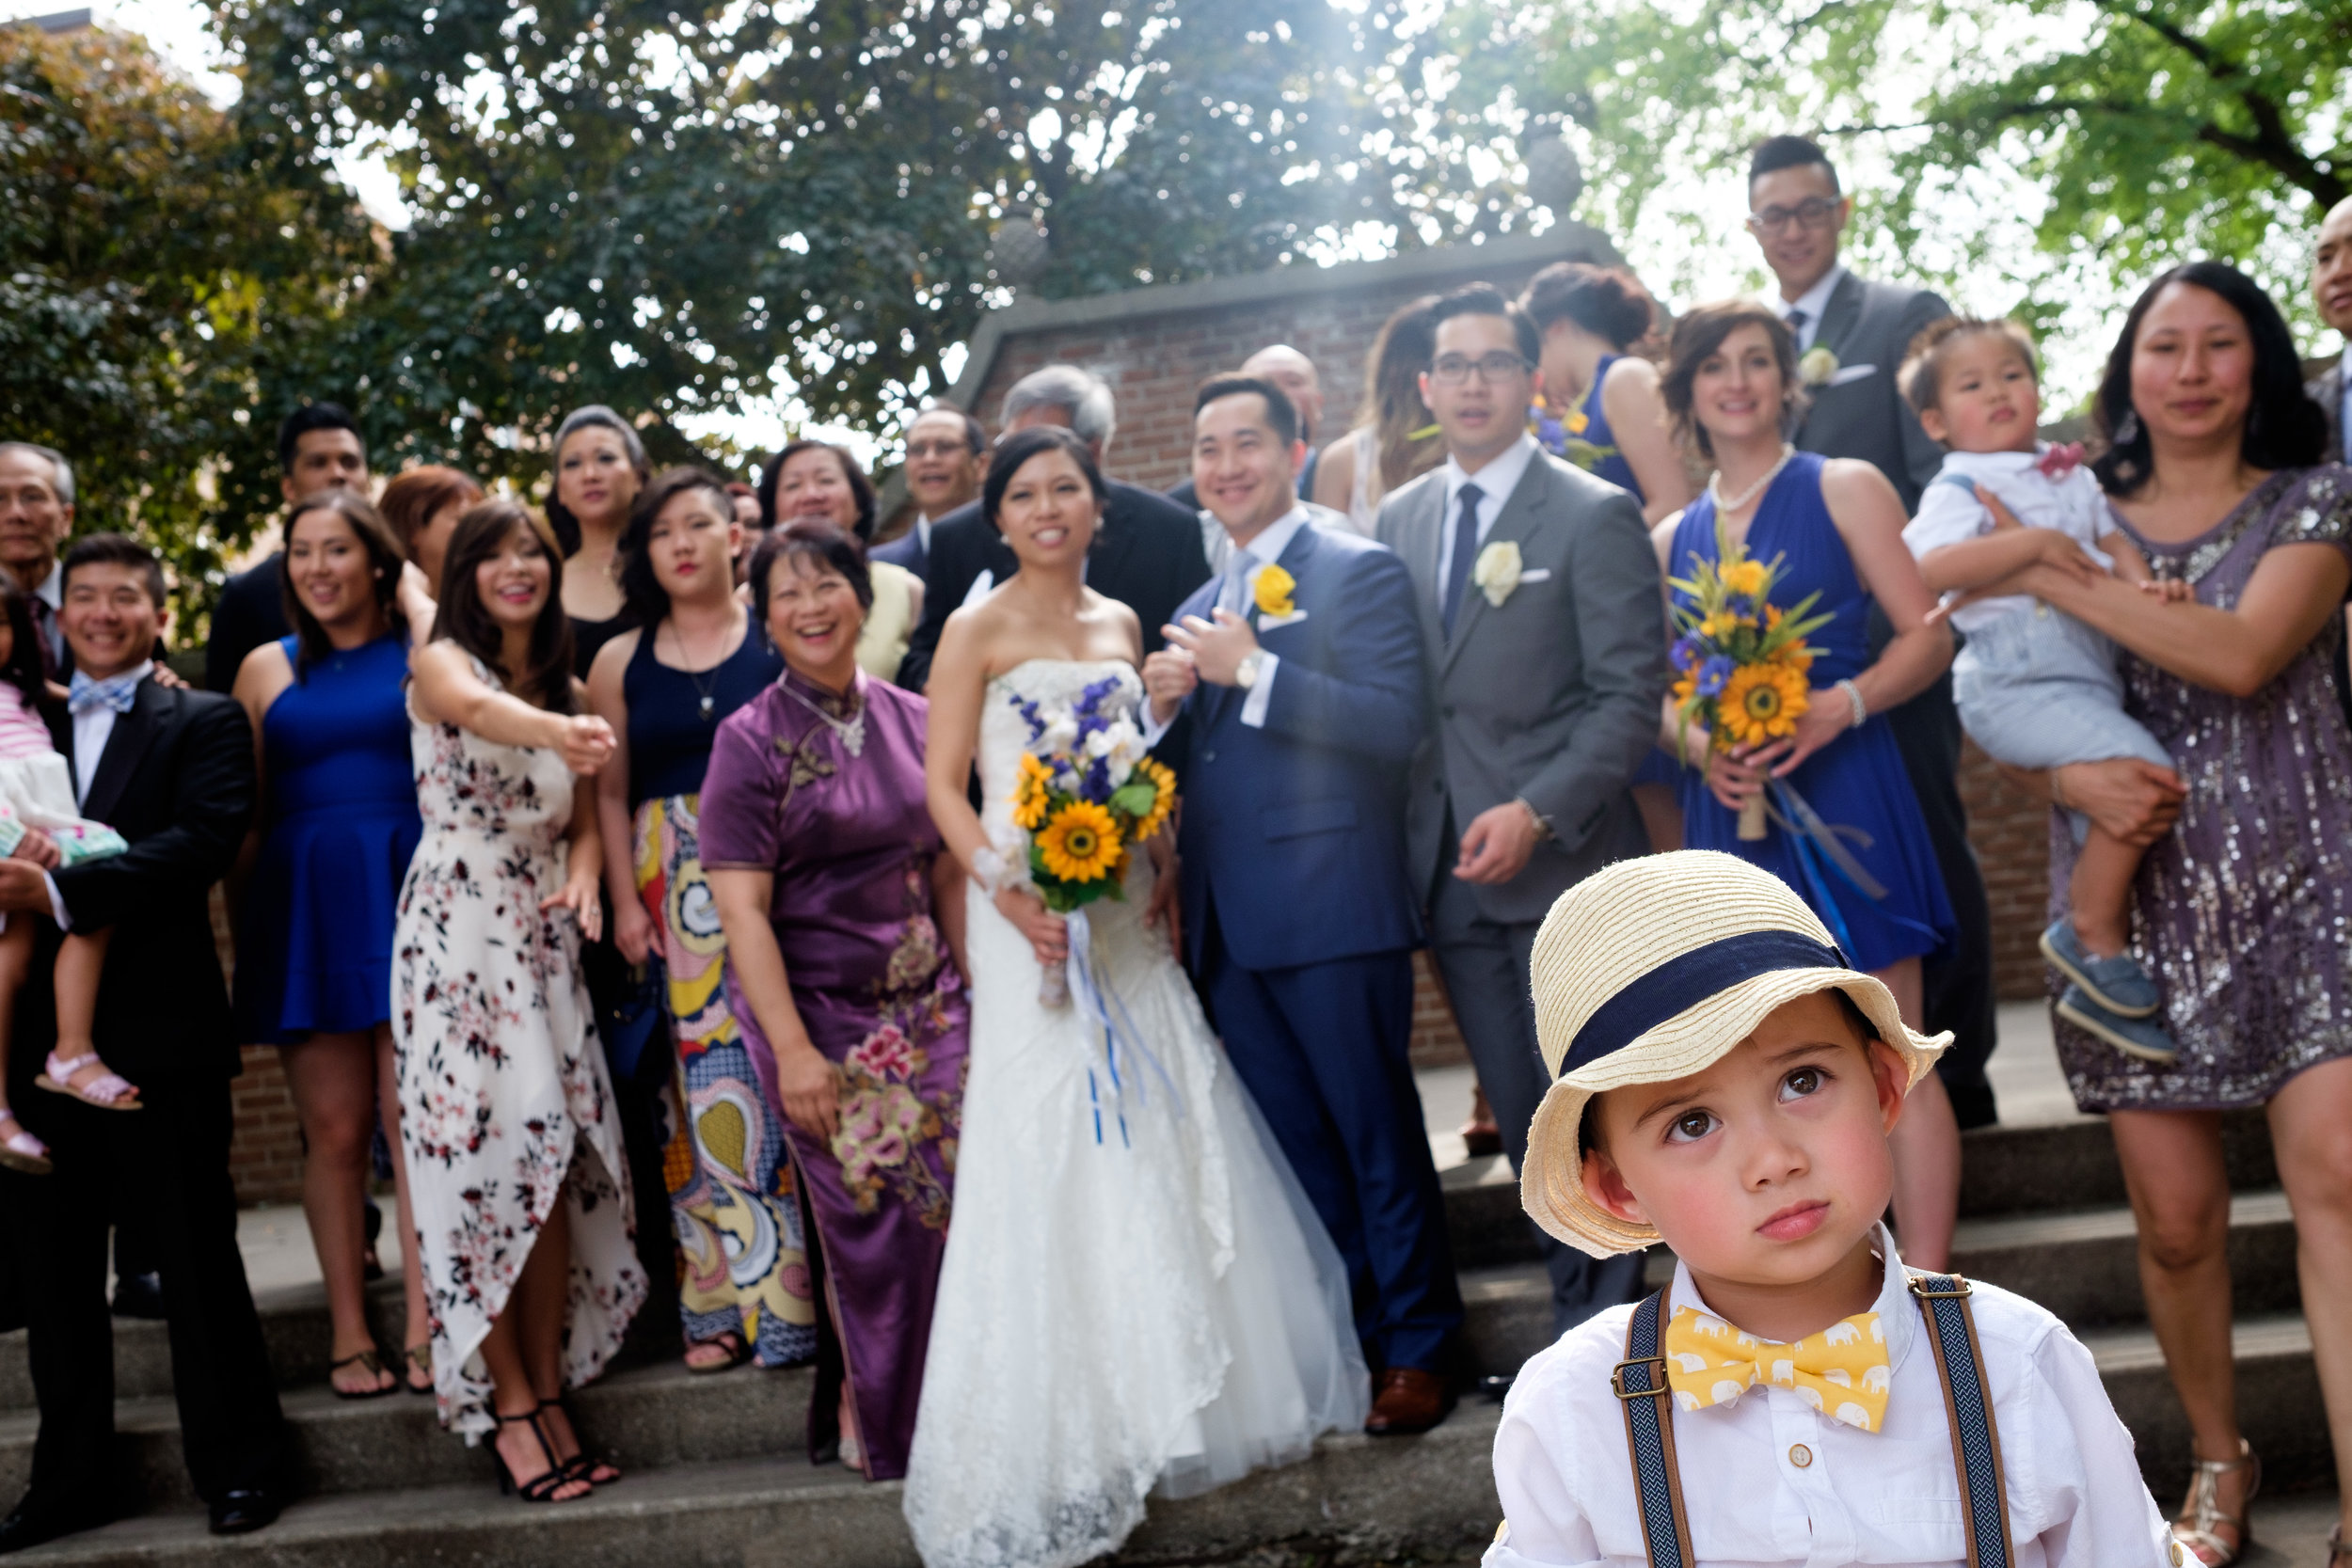  It's better to be lucky than good! &nbsp; (it also helps being good).  Sometimes when you have an uncooperative ring bearer you turn lemons into lemonade. &nbsp;As we were trying to get a big extended family picture the groom's nephew decided he was